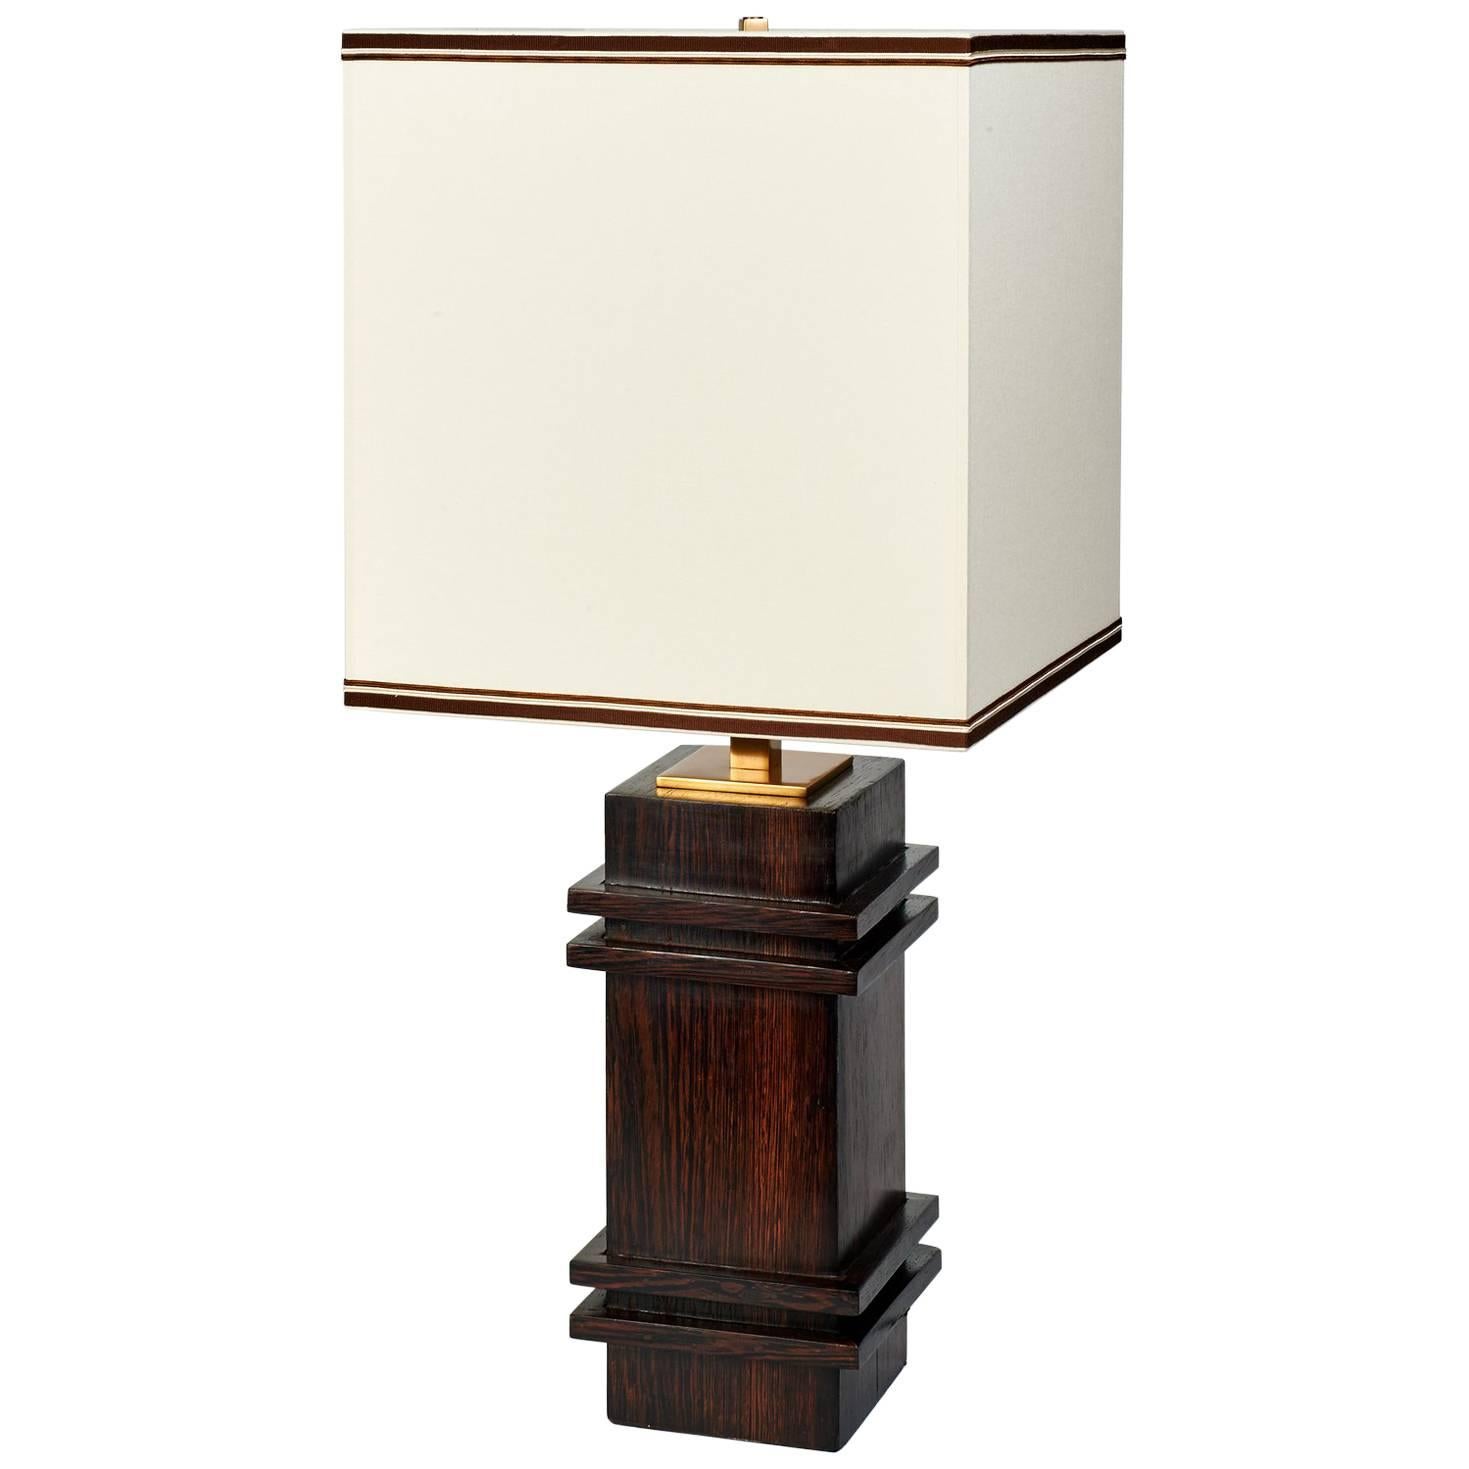 French Palmwood Table Lamp att. to Jacques Adnet, 1950s